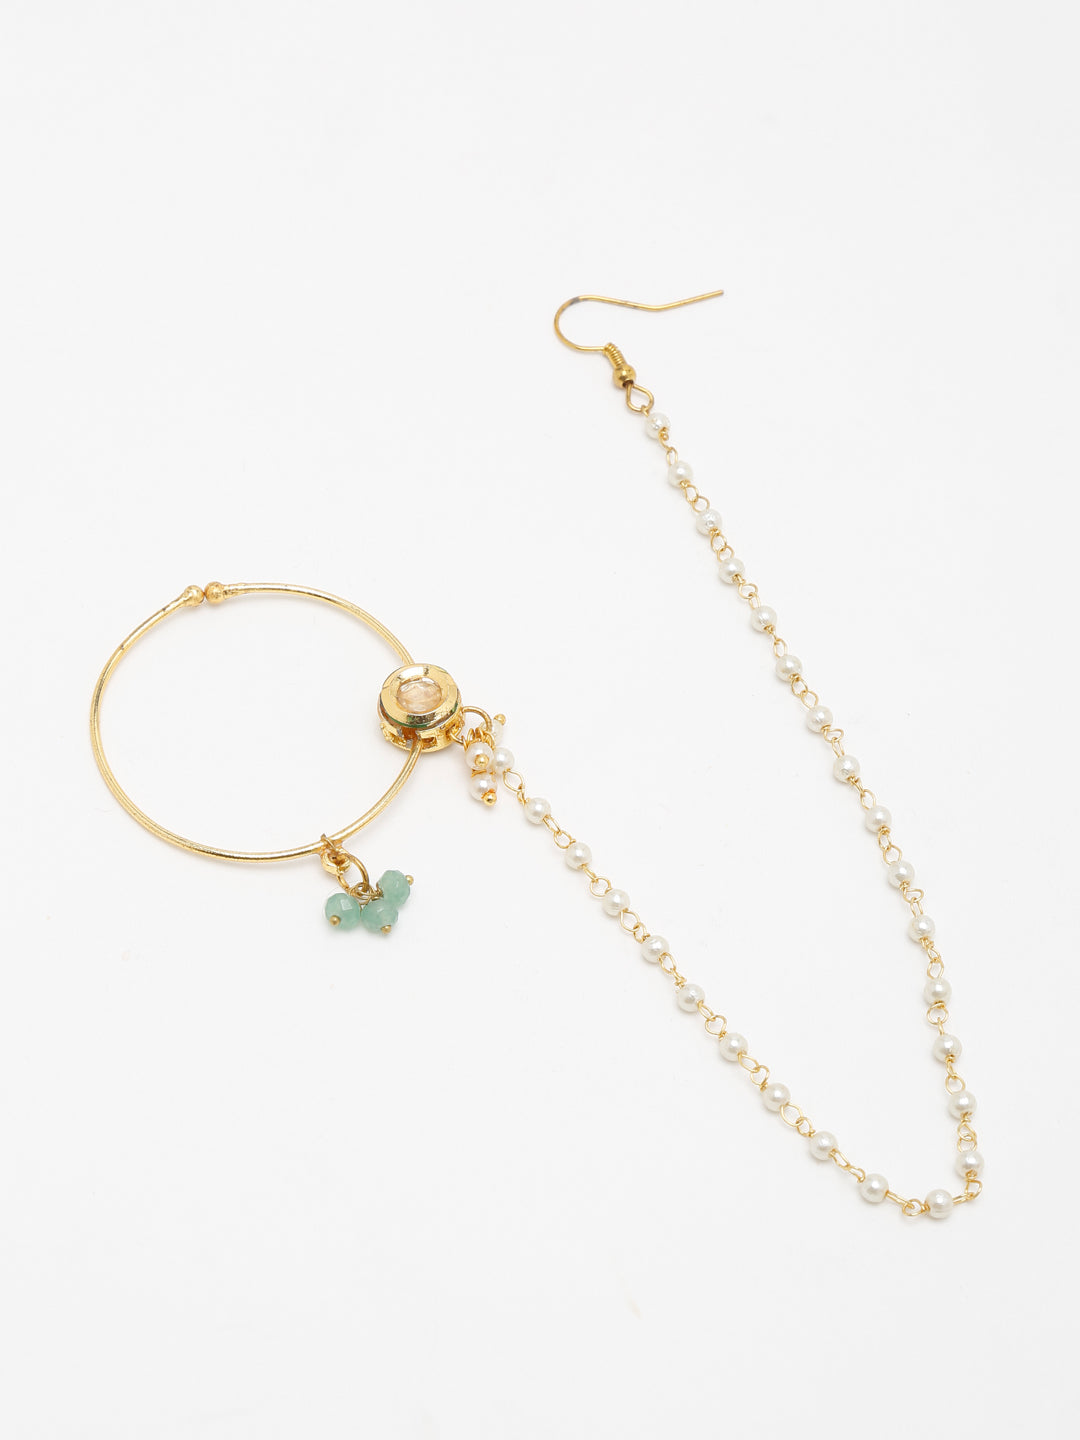 Kundan Nose Ring & Nath For Women By Ruby Raang